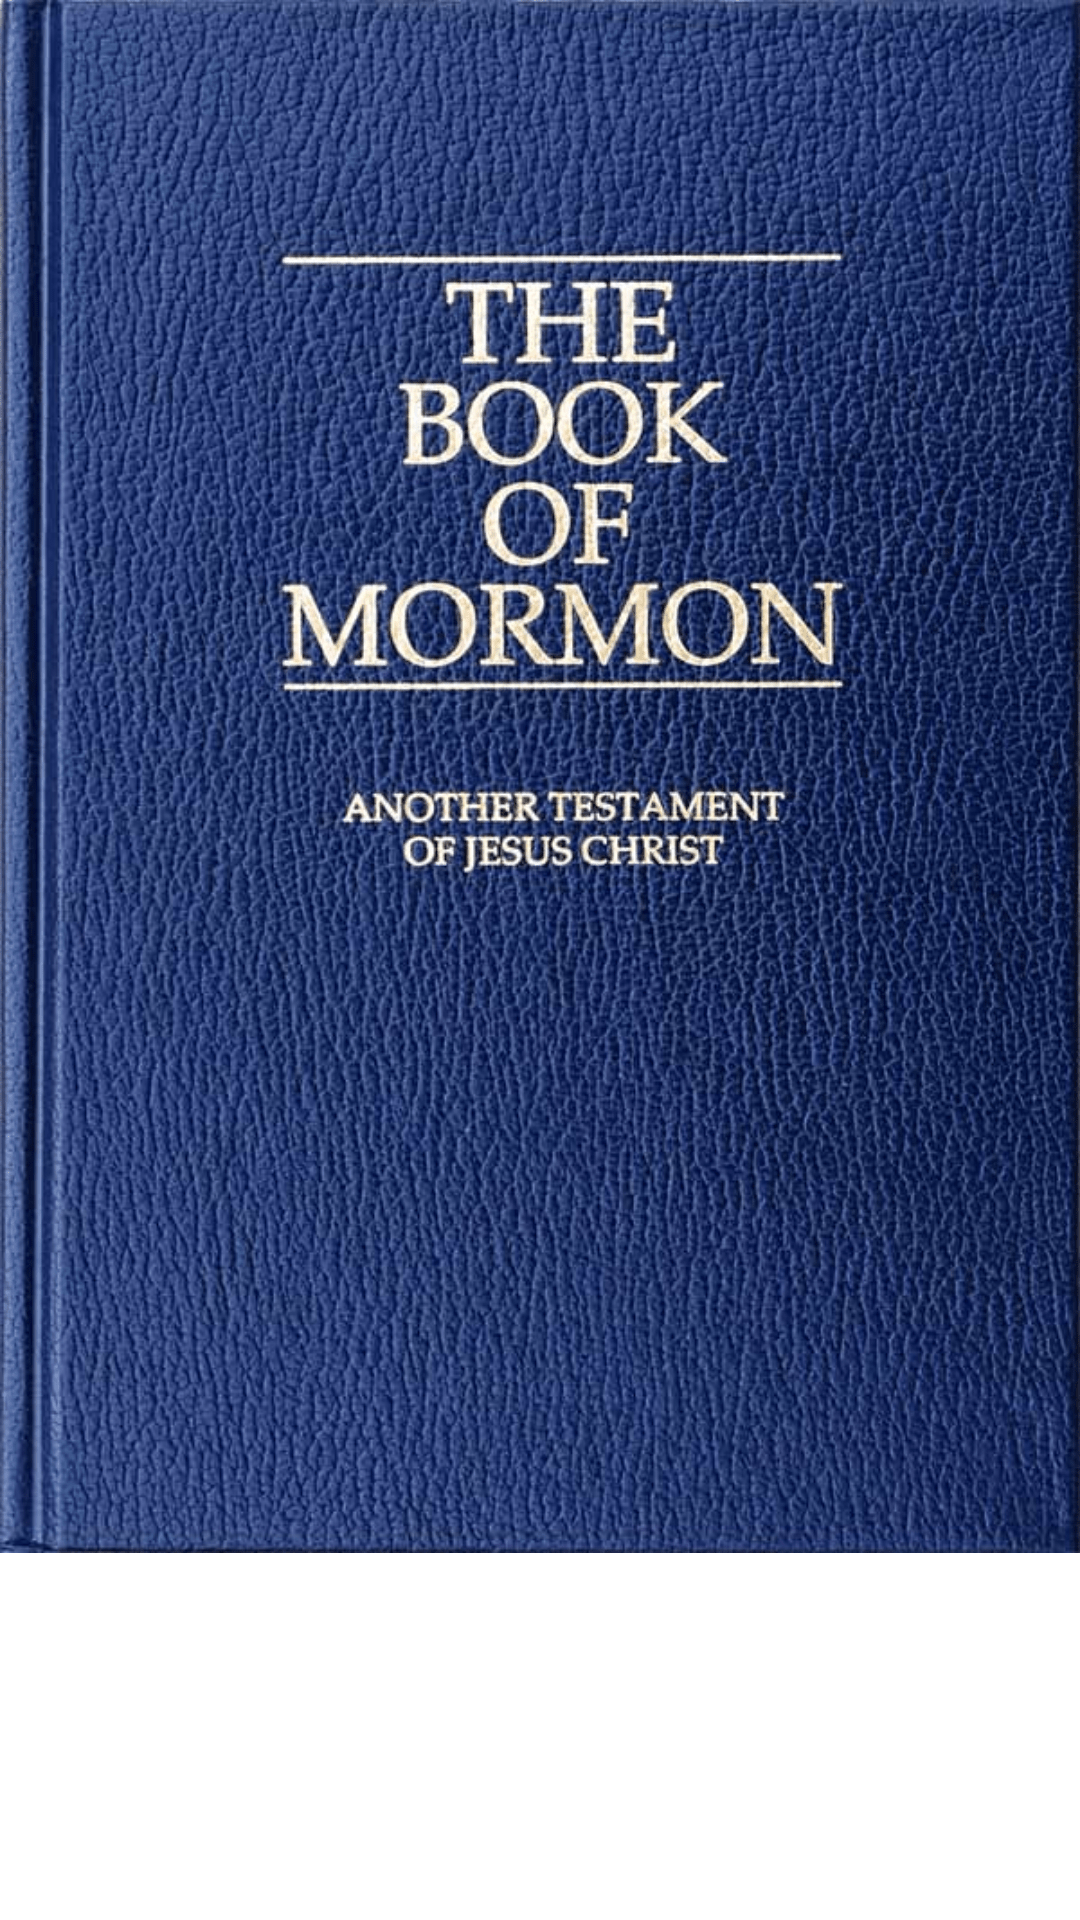 The Book of Mormon: Another Testament of Jesus Christ